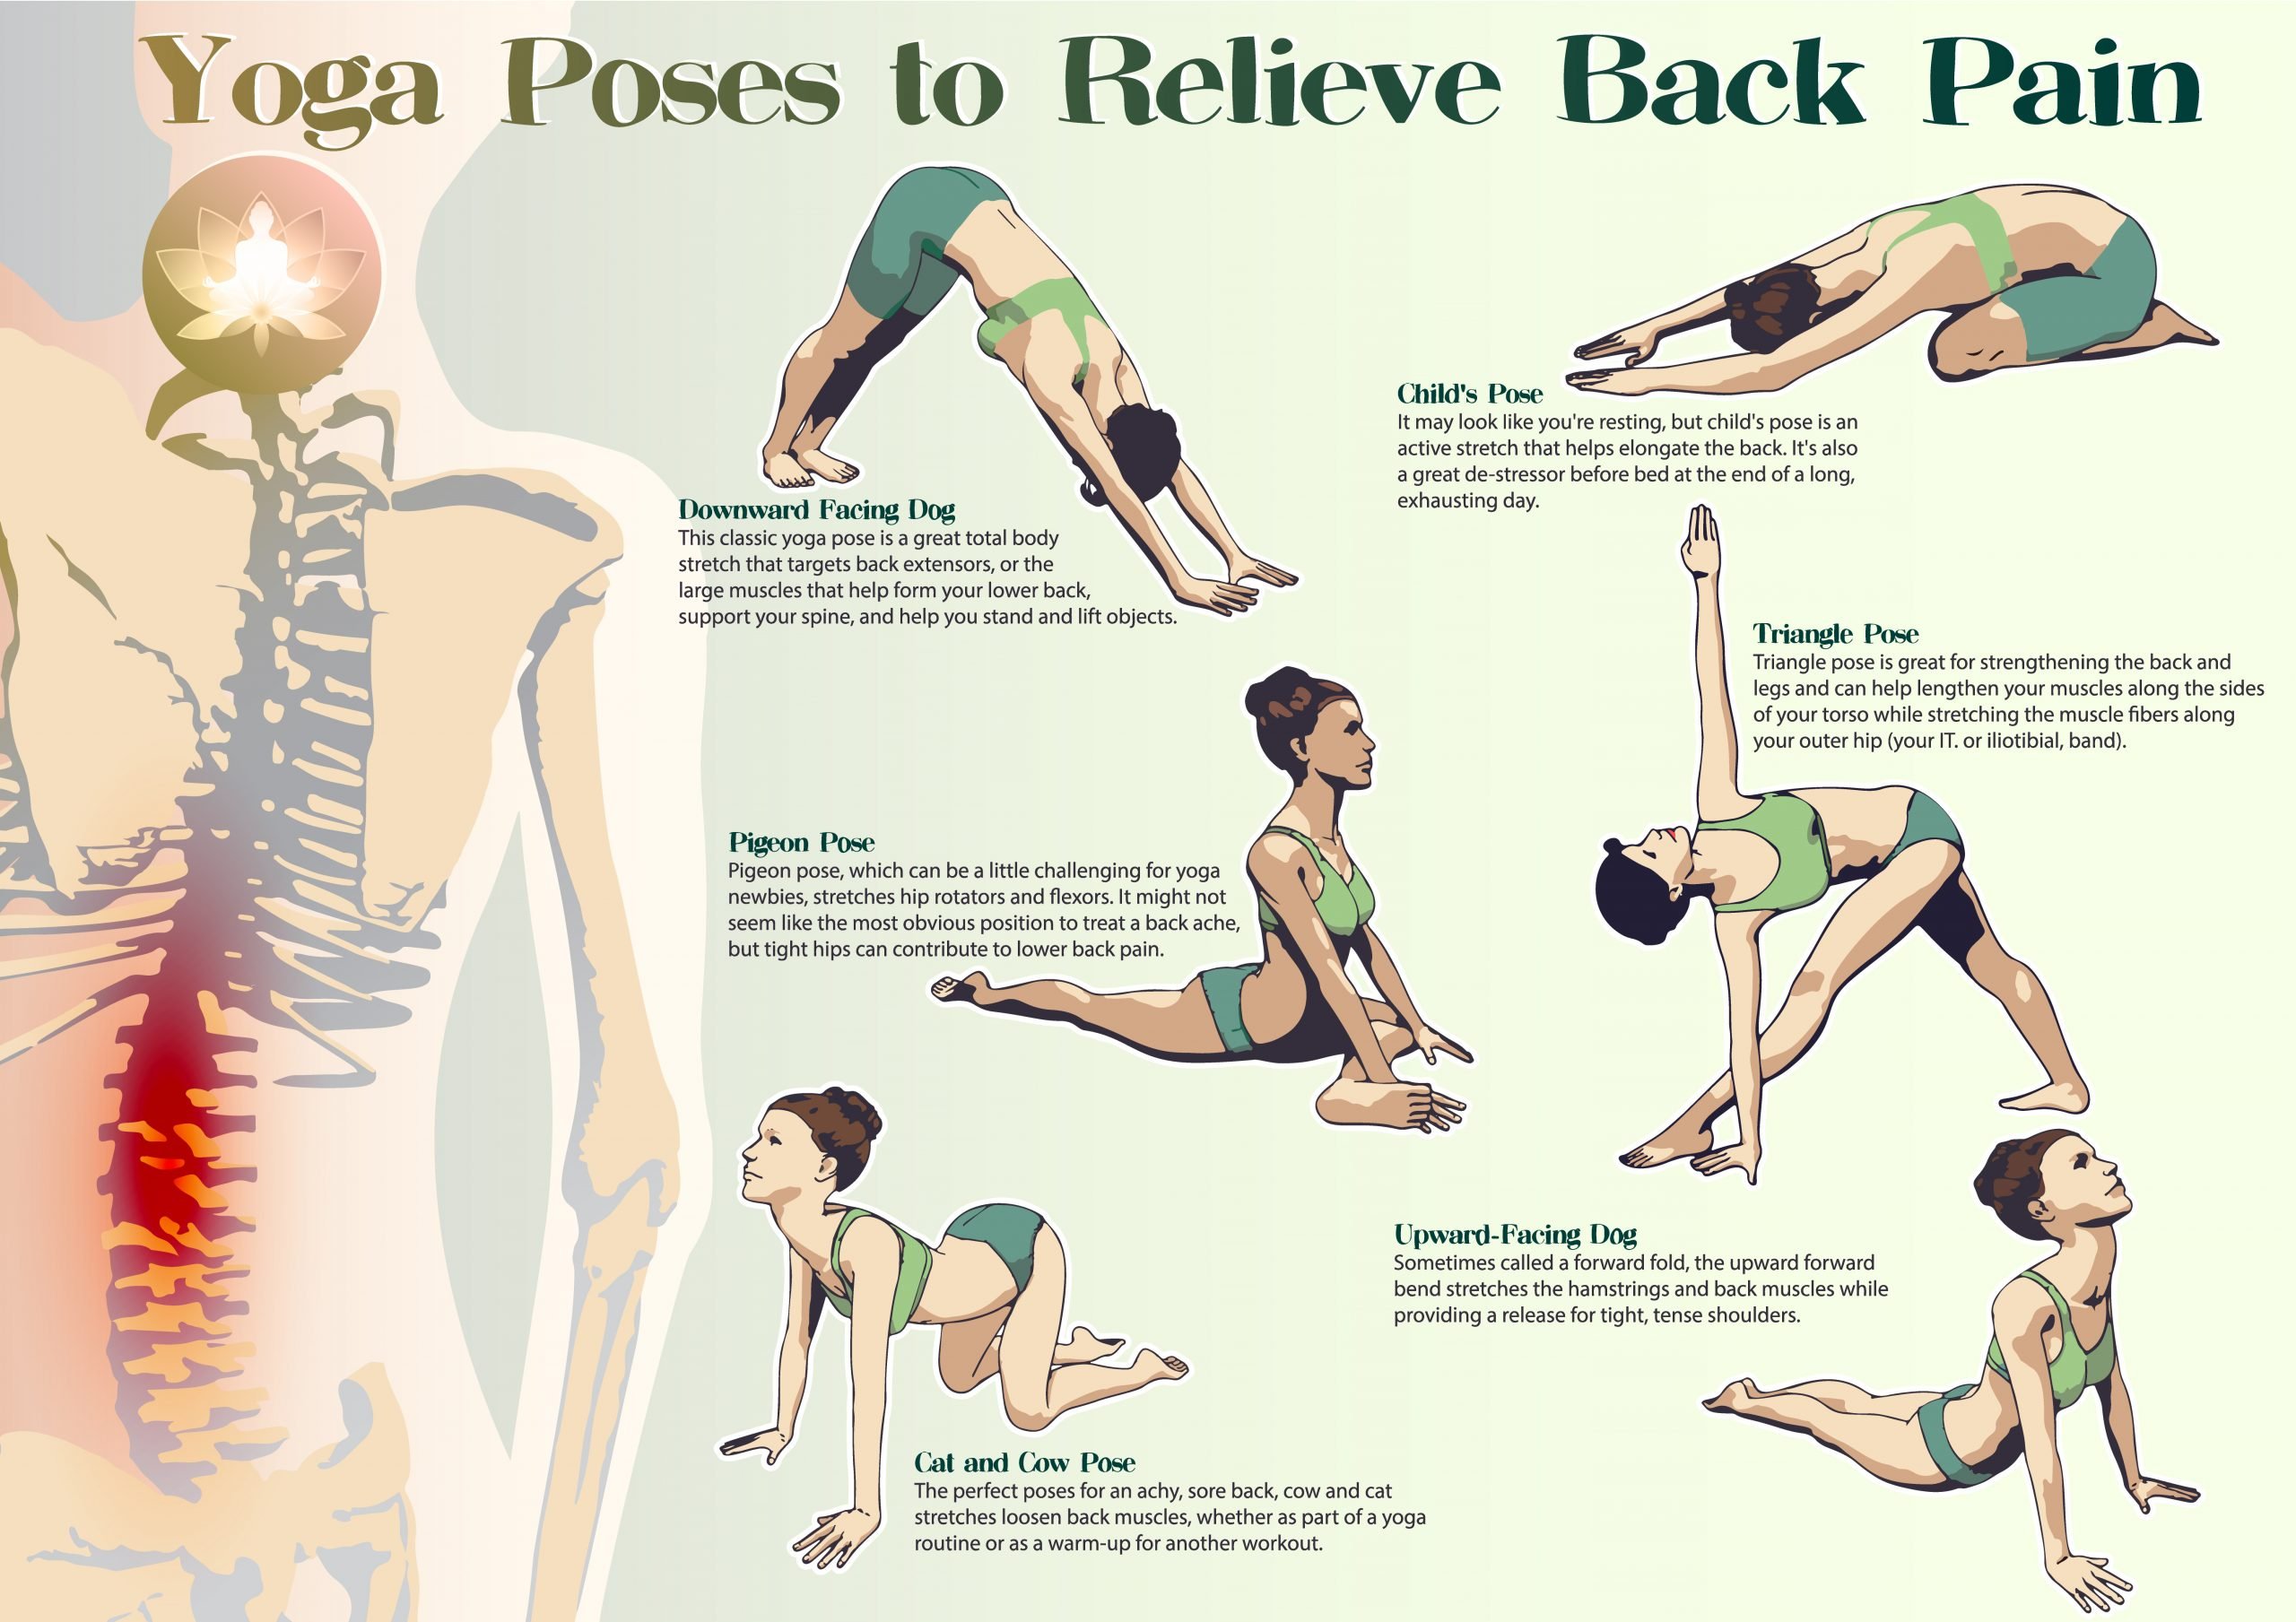 How to relieve back pain: 6 best yoga poses